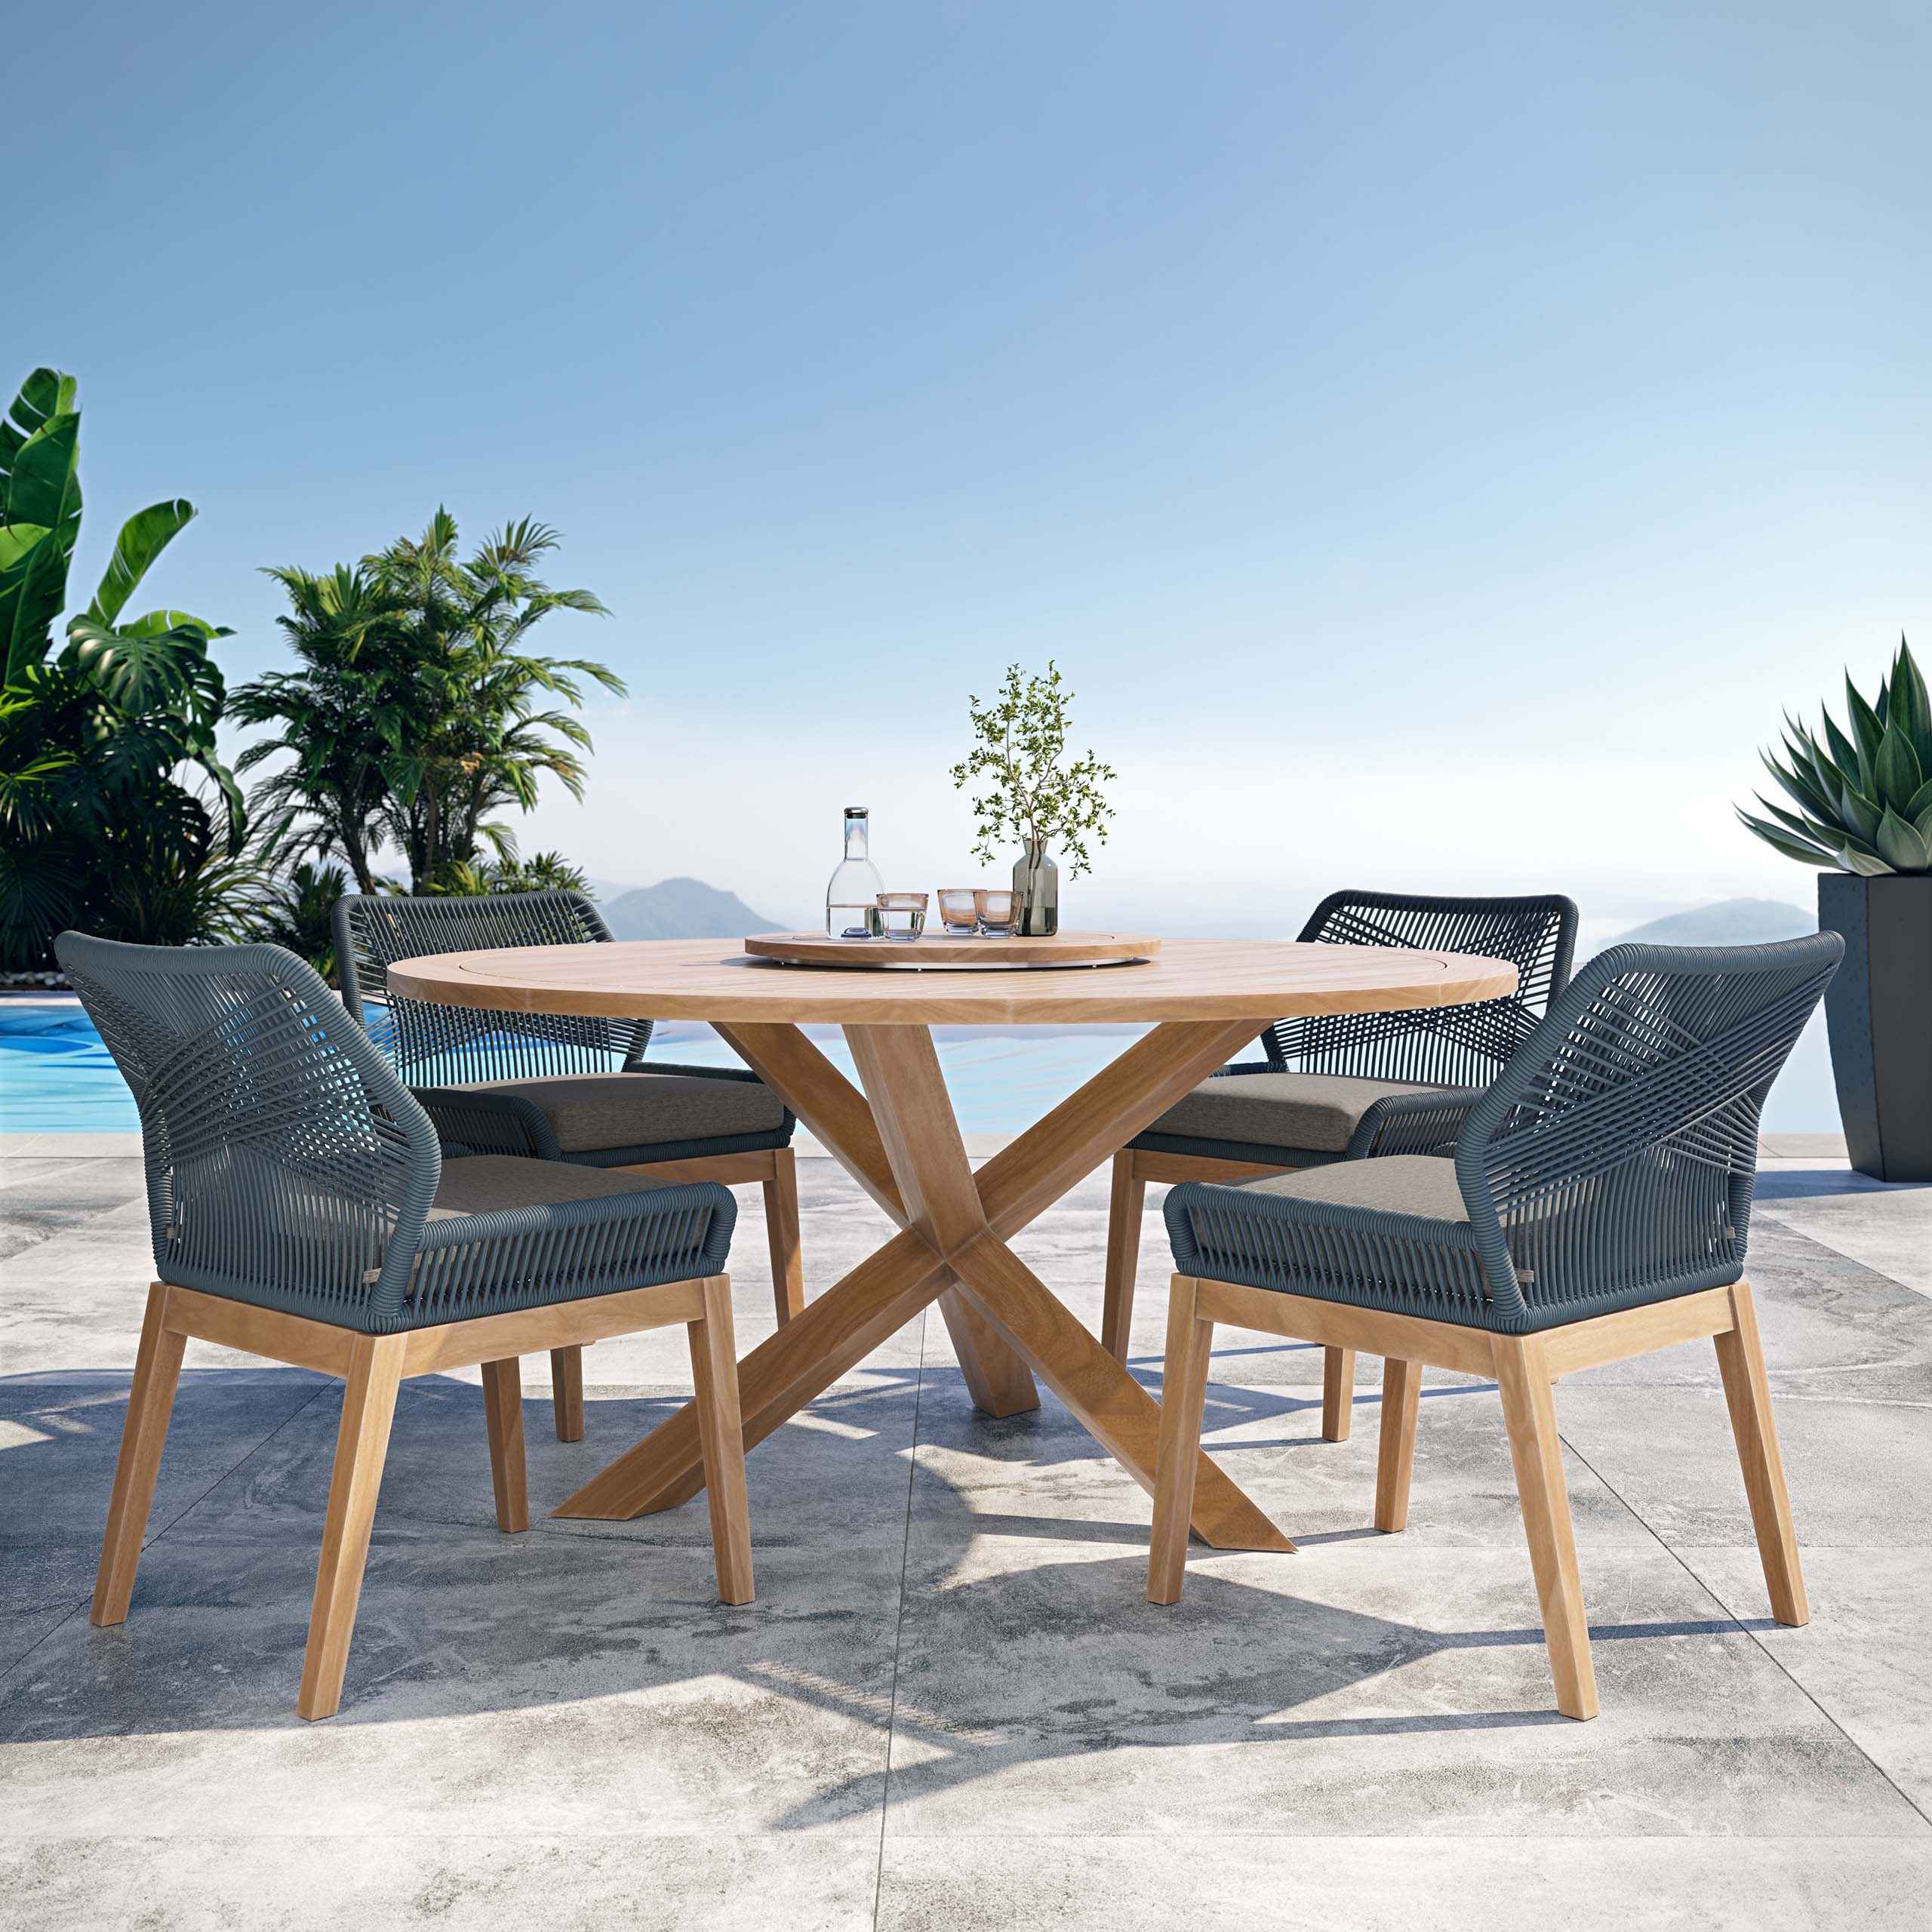 outdoor wooden wood teak furniture 3d visualization photorealistic table chairs 3d corner